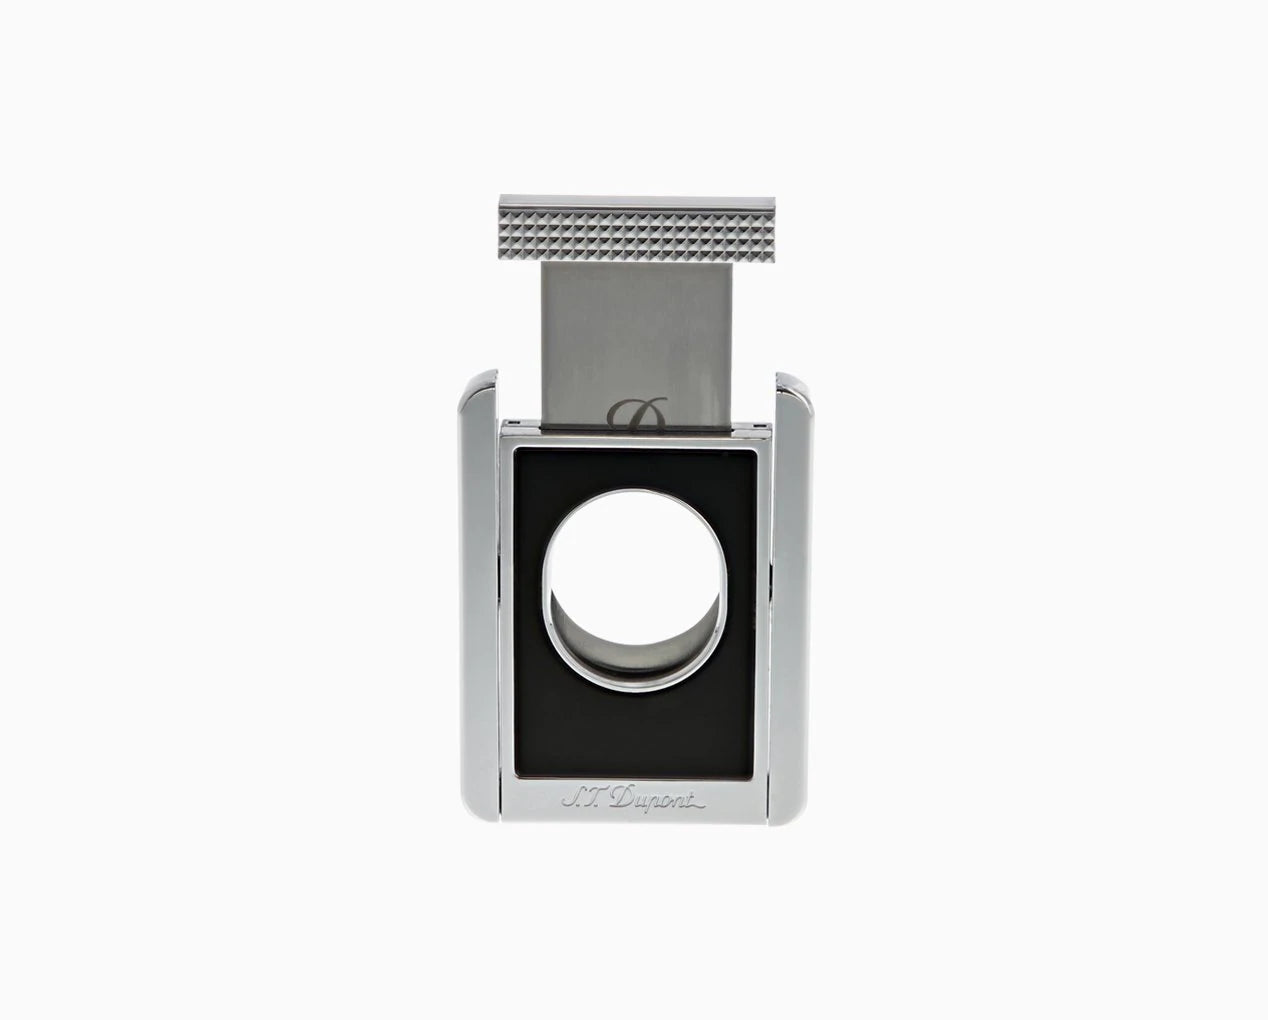 S.T. Dupont Black Chrome Cigar Cutter Stand